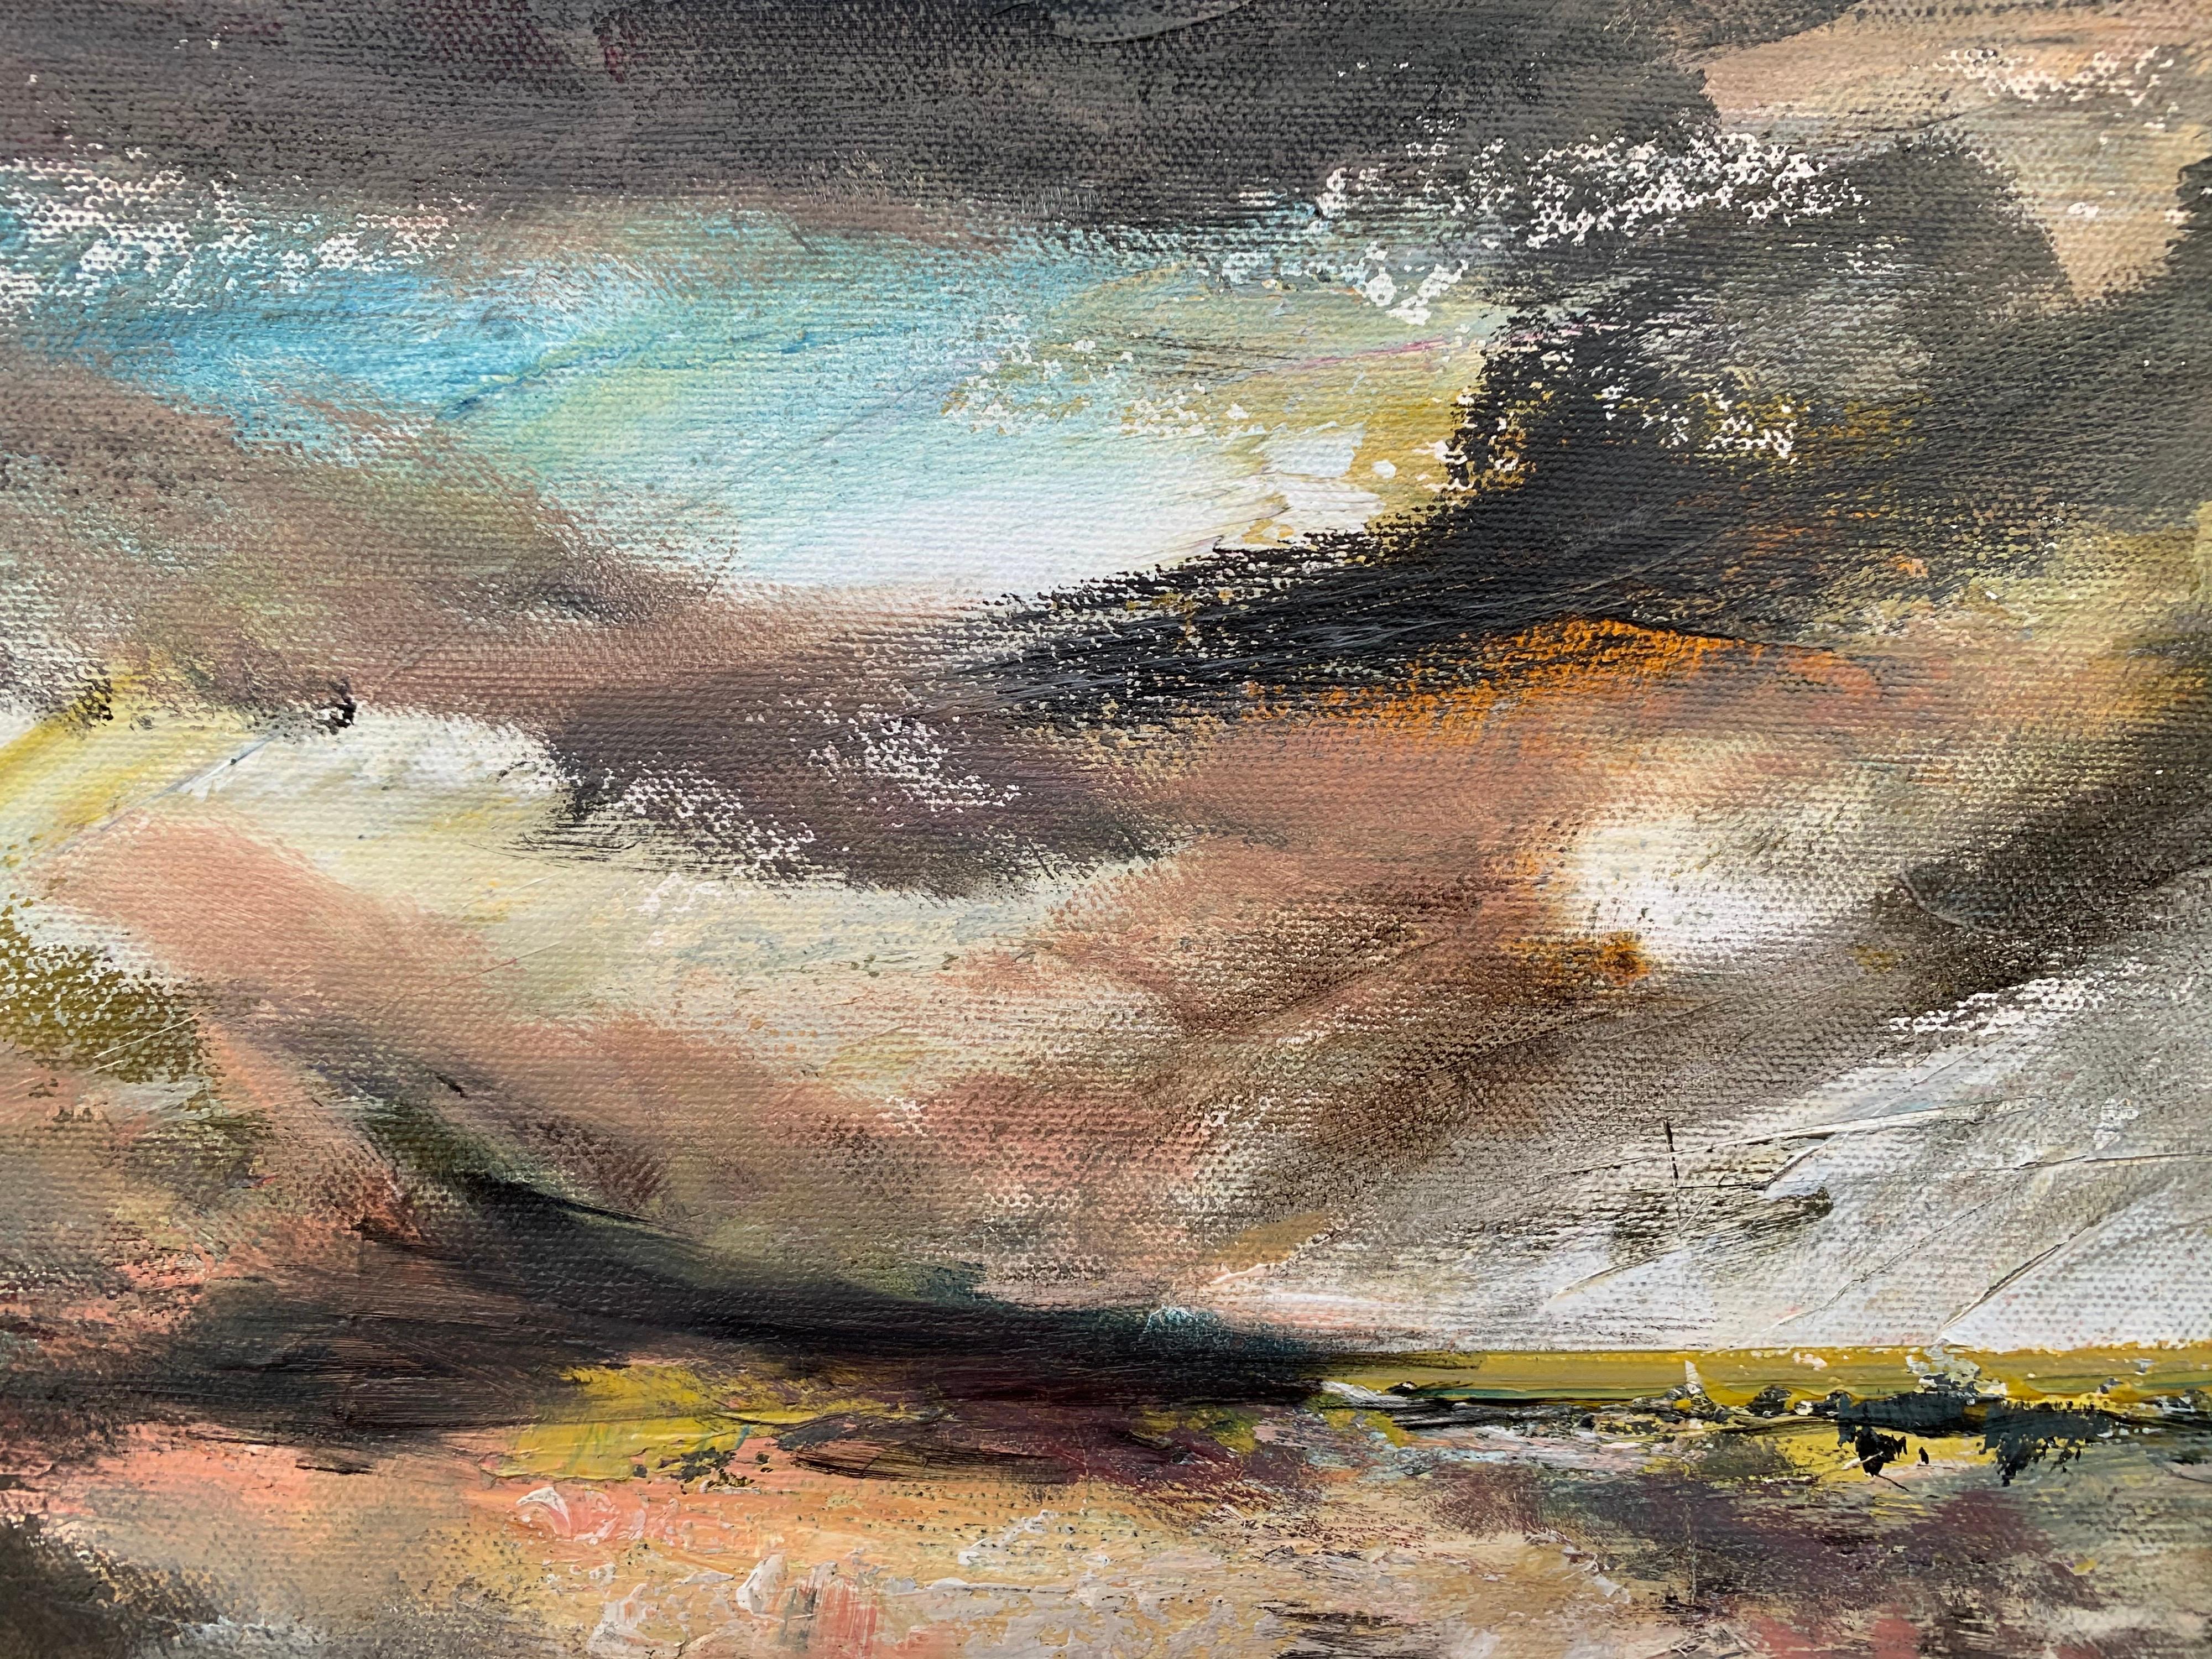 Dark Atmospheric Abstract Landscape Painting by Contemporary British Artist For Sale 11